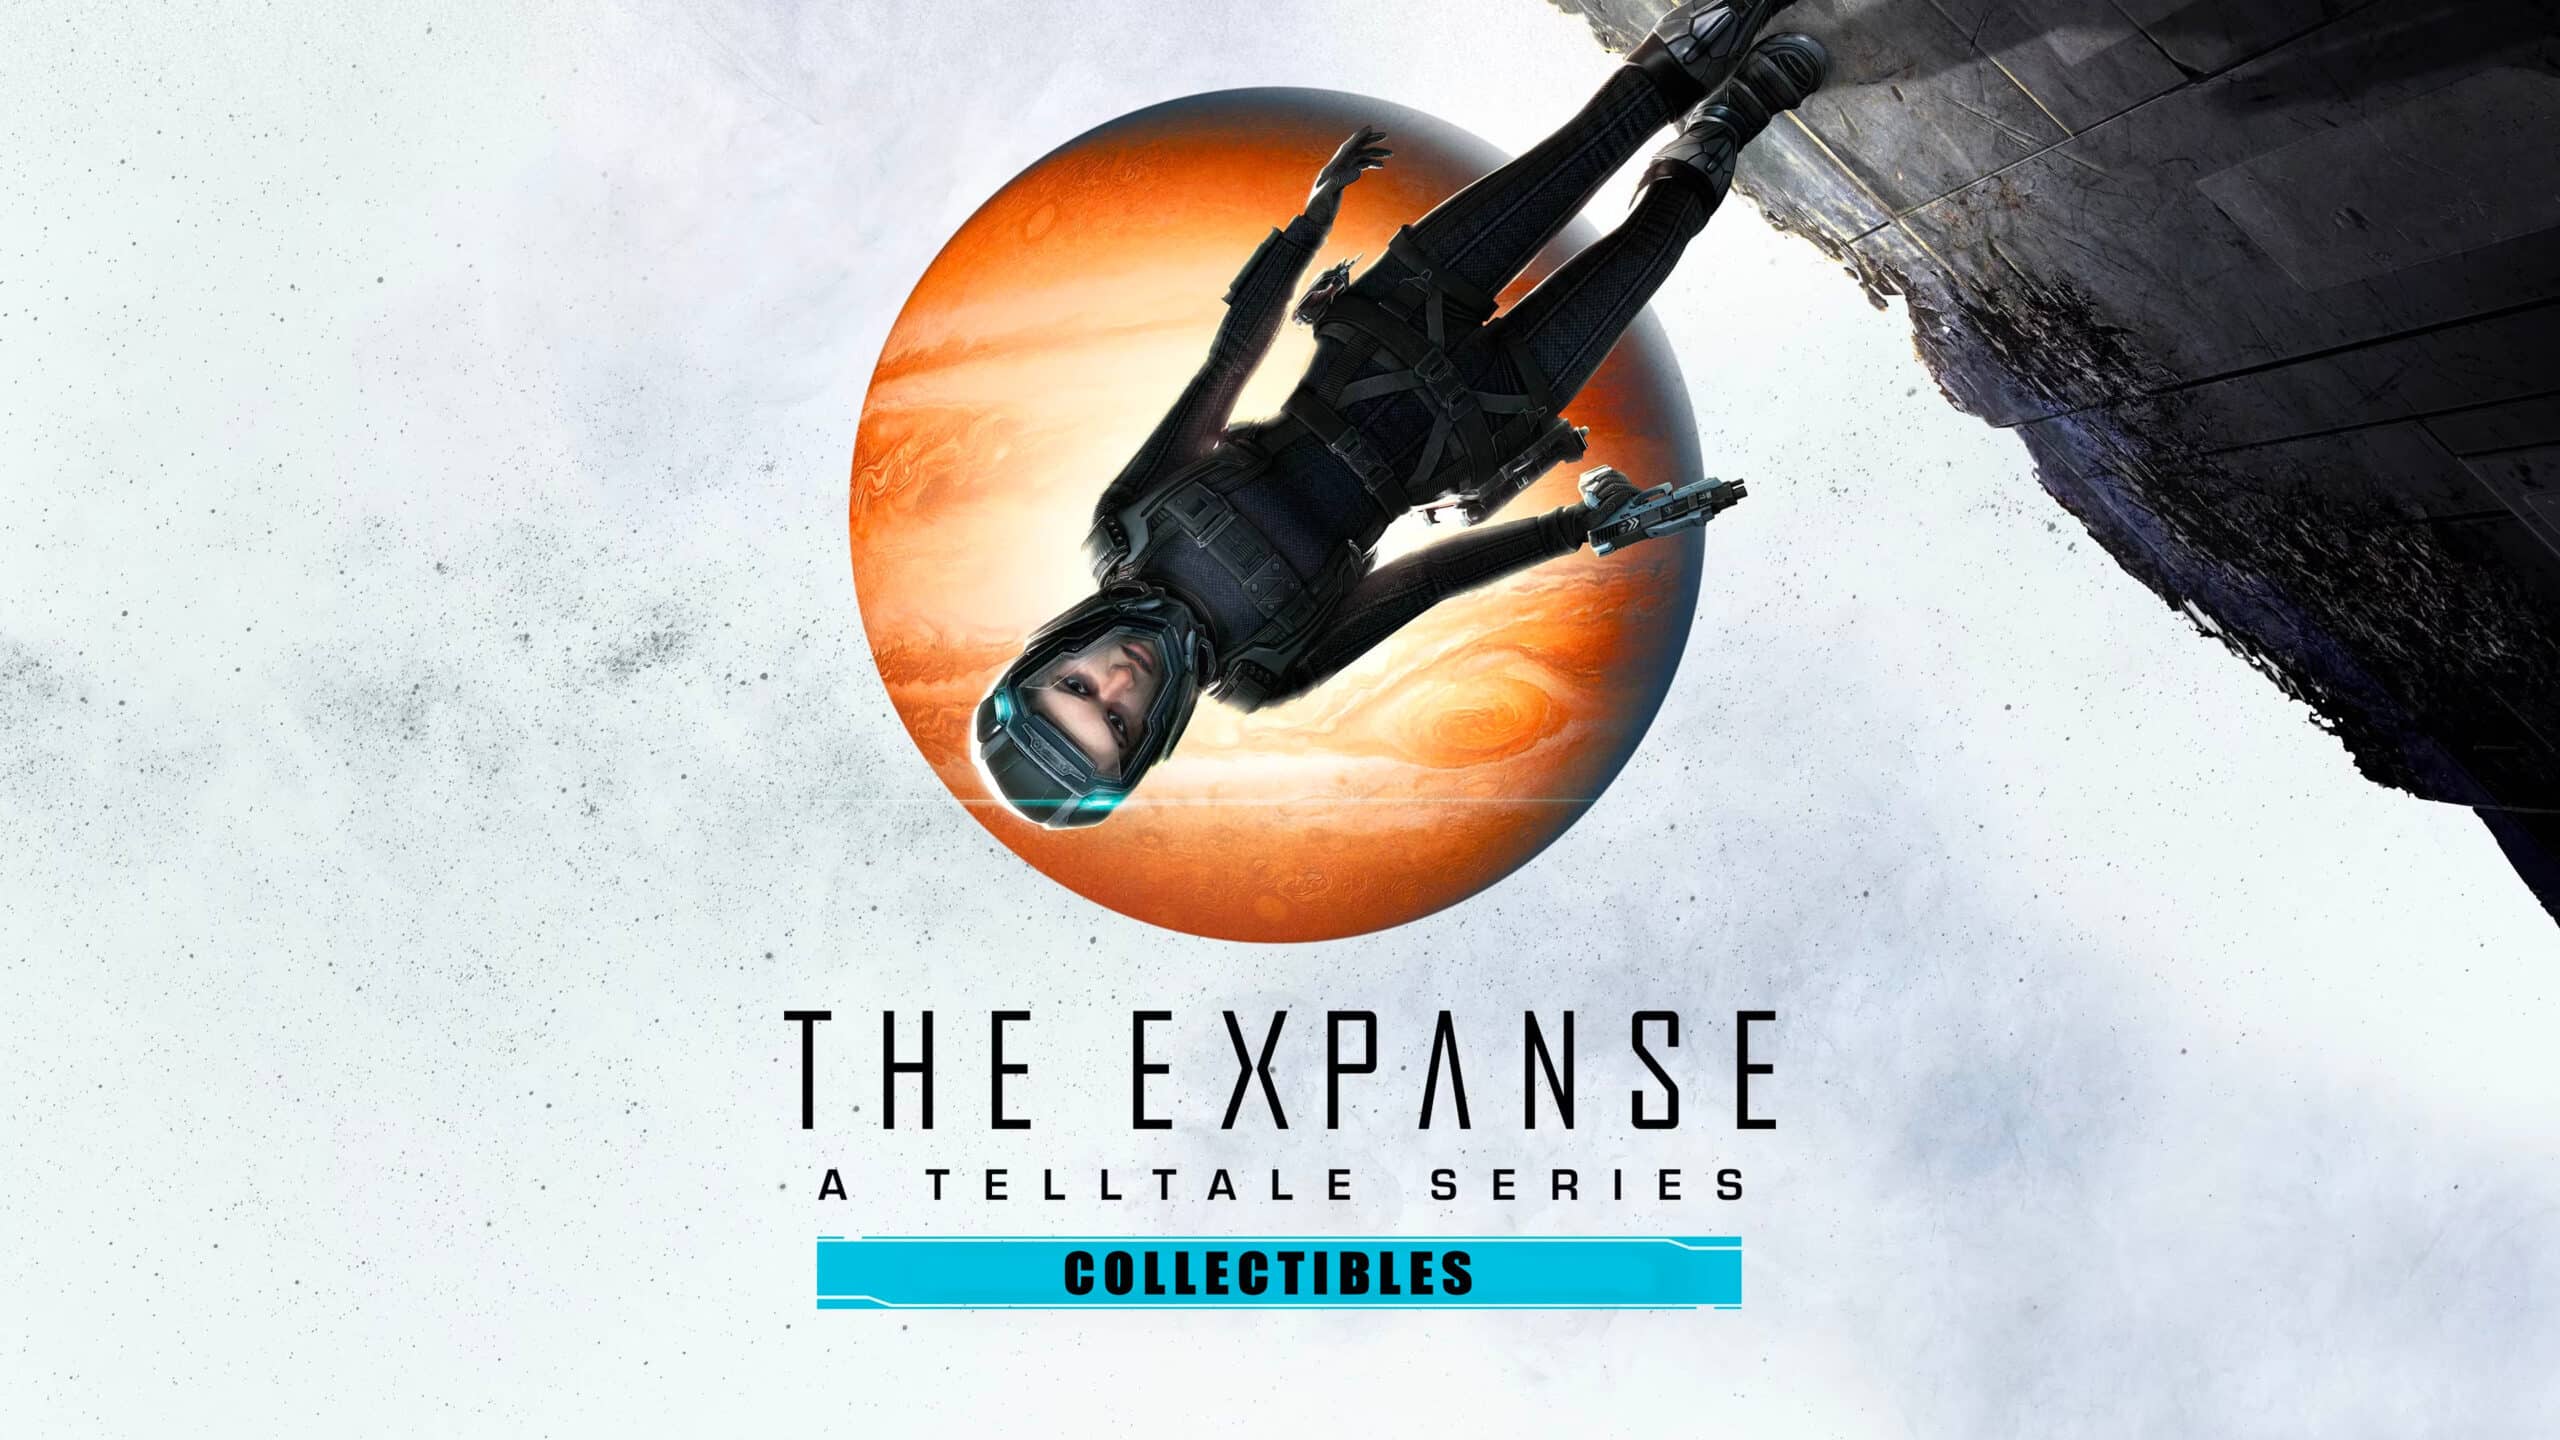 The Expanse: A Telltale Series Collectibles